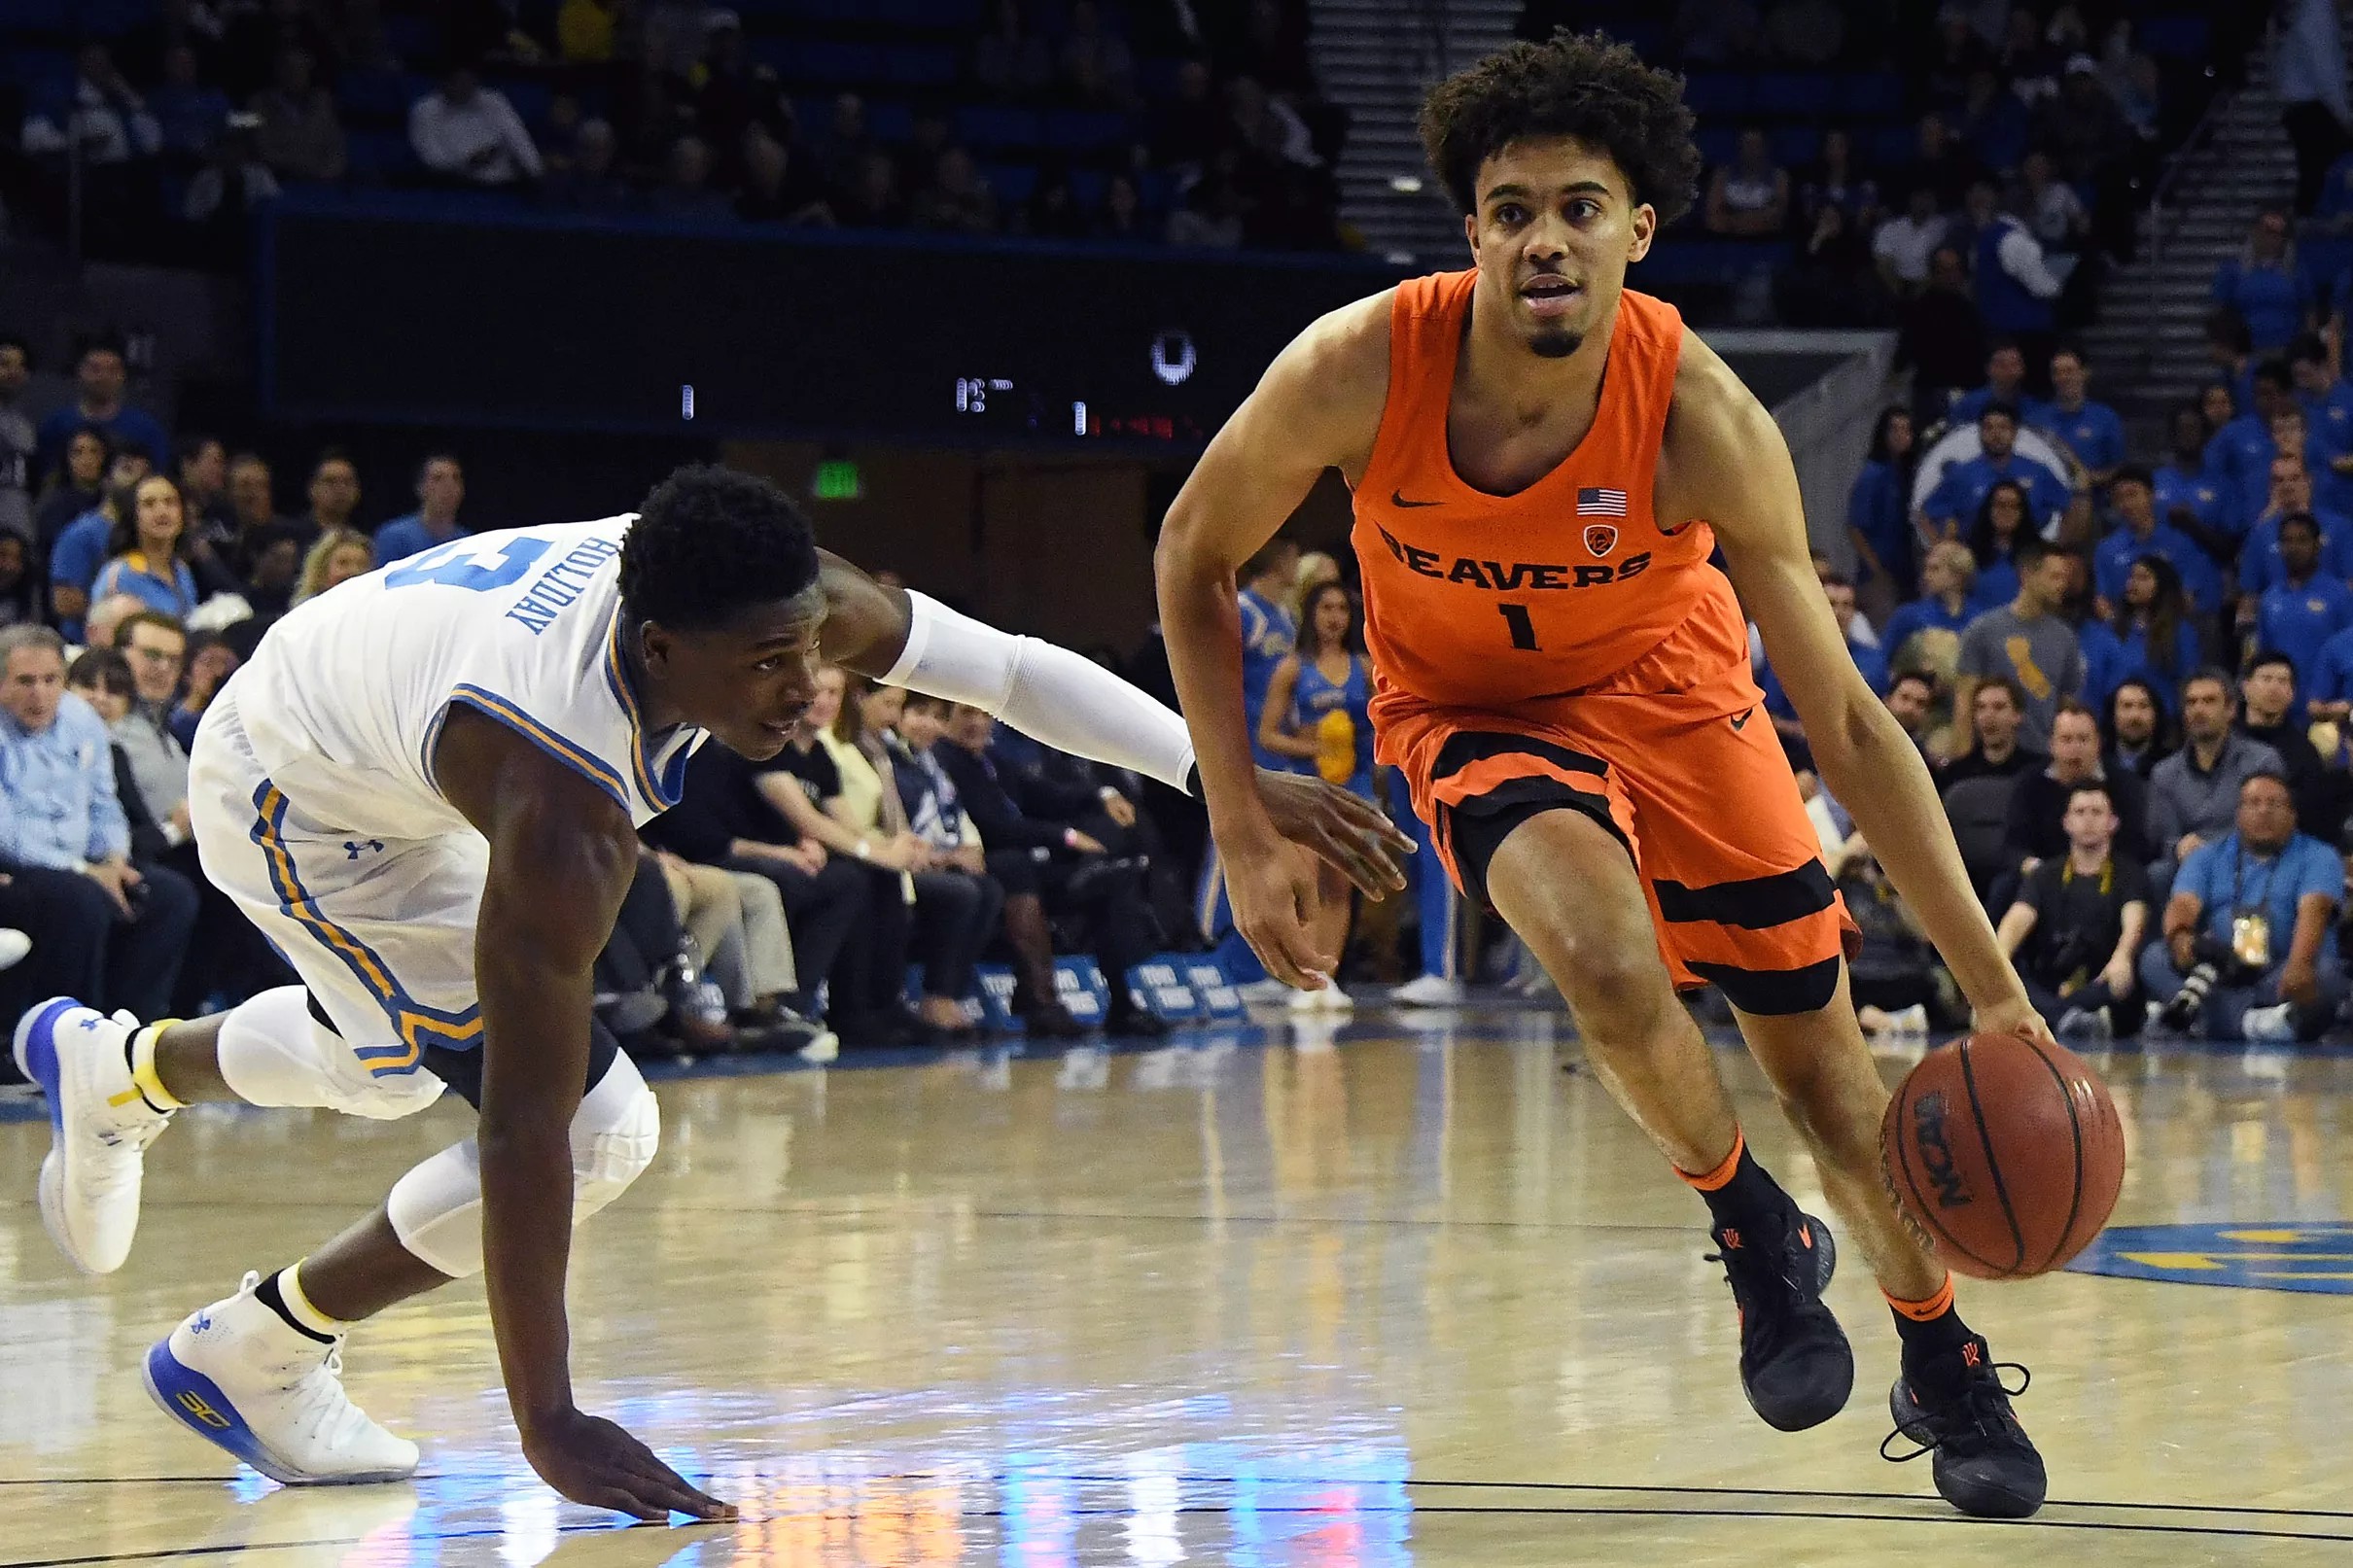 Oregon State Basketball An Updated Look At The 20182019 Roster